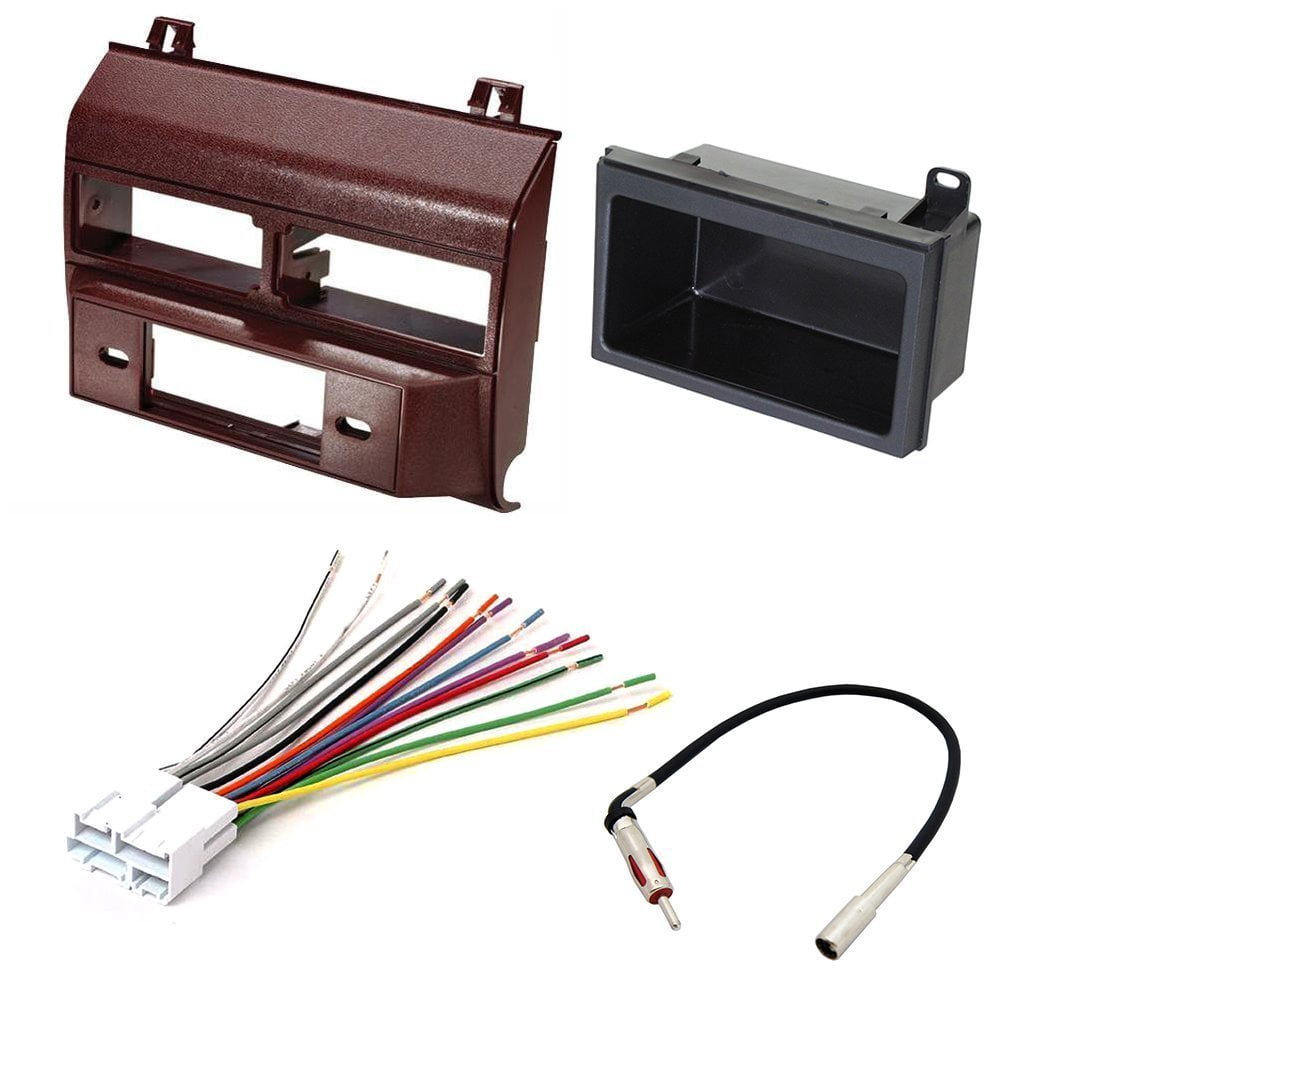 Beige Radio Stereo Dash Kit w/Wire Harness+Pocket+Antenna Adapter Fits Chevy Pickup Truck 88-94 